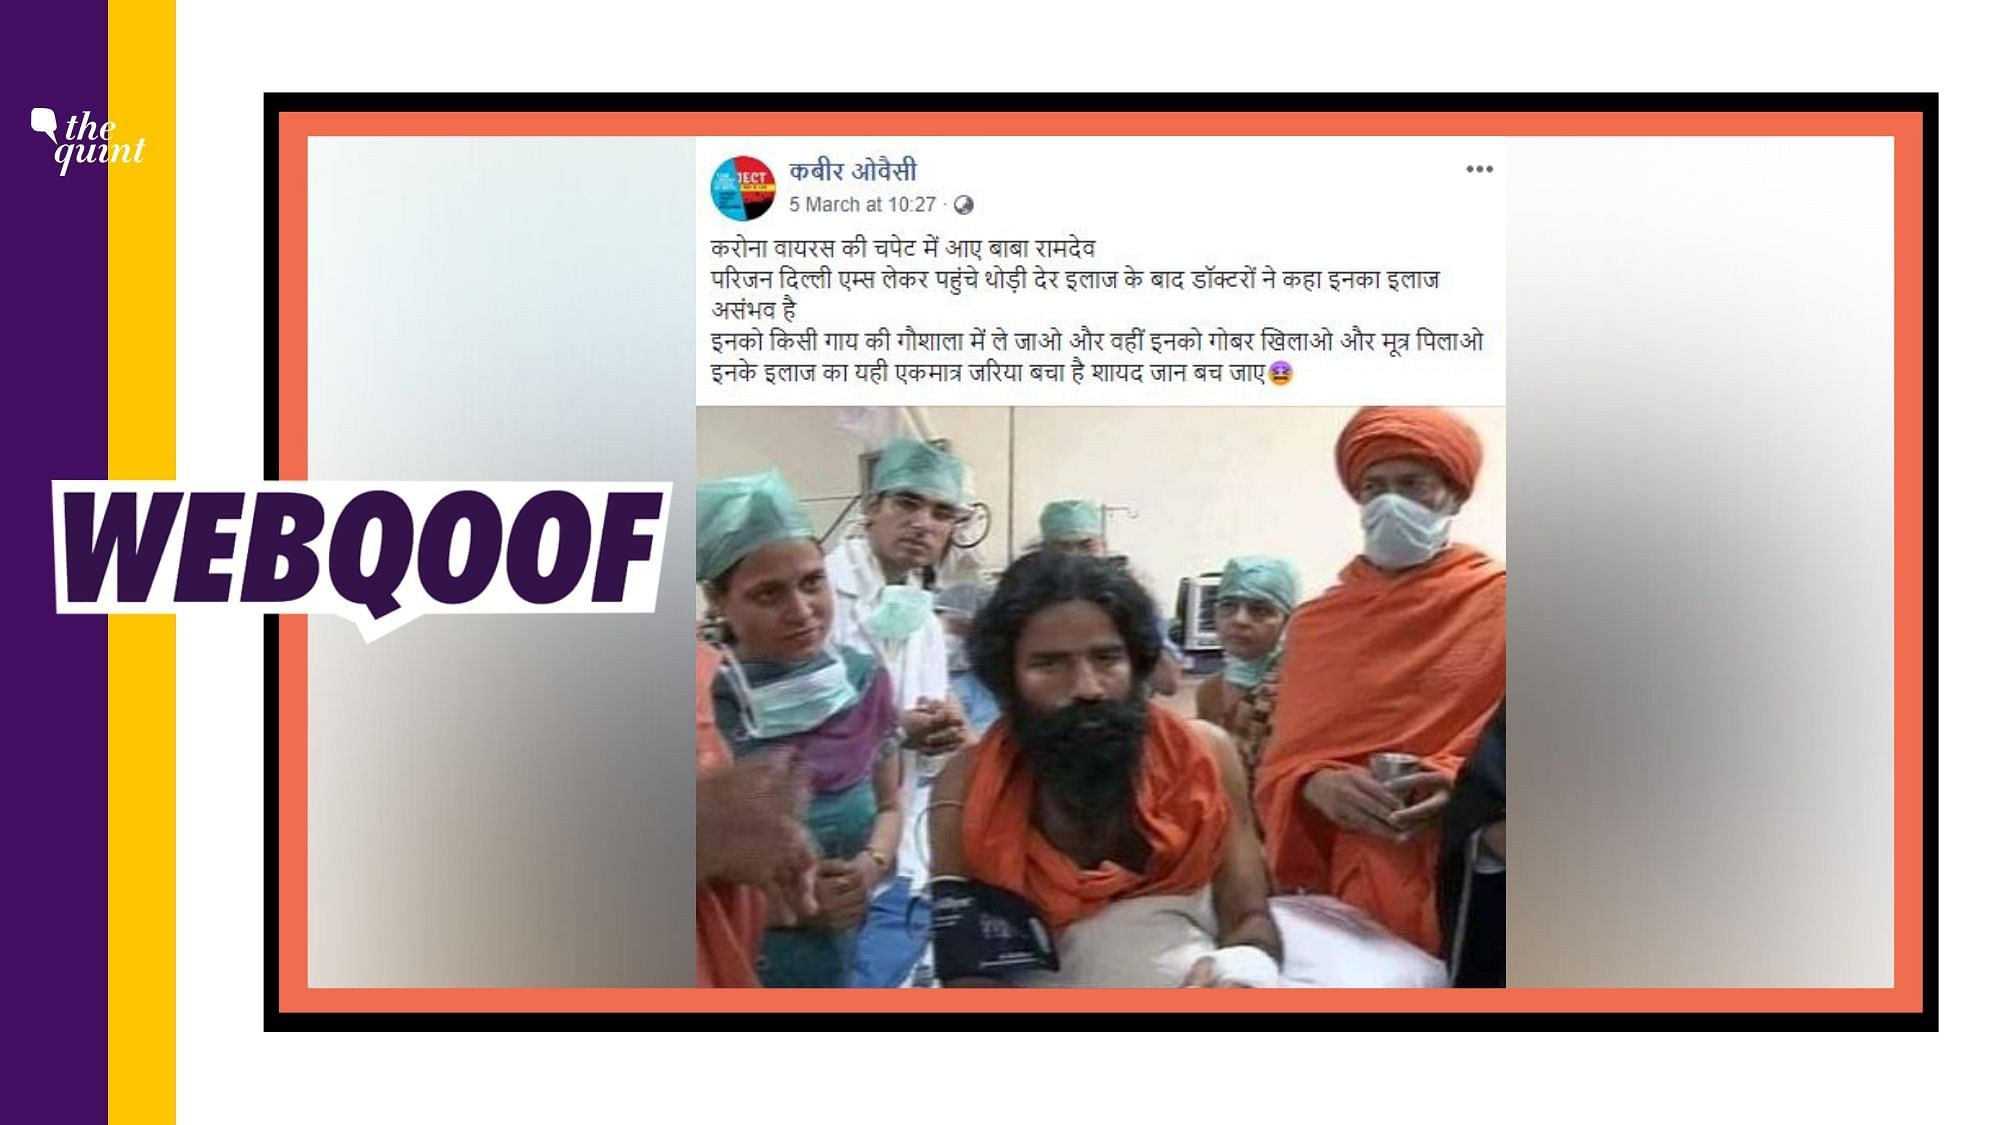 A picture of Baba Ramdev is being shared on Facebook with a claim that the yoga guru has been infected with coronavirus.